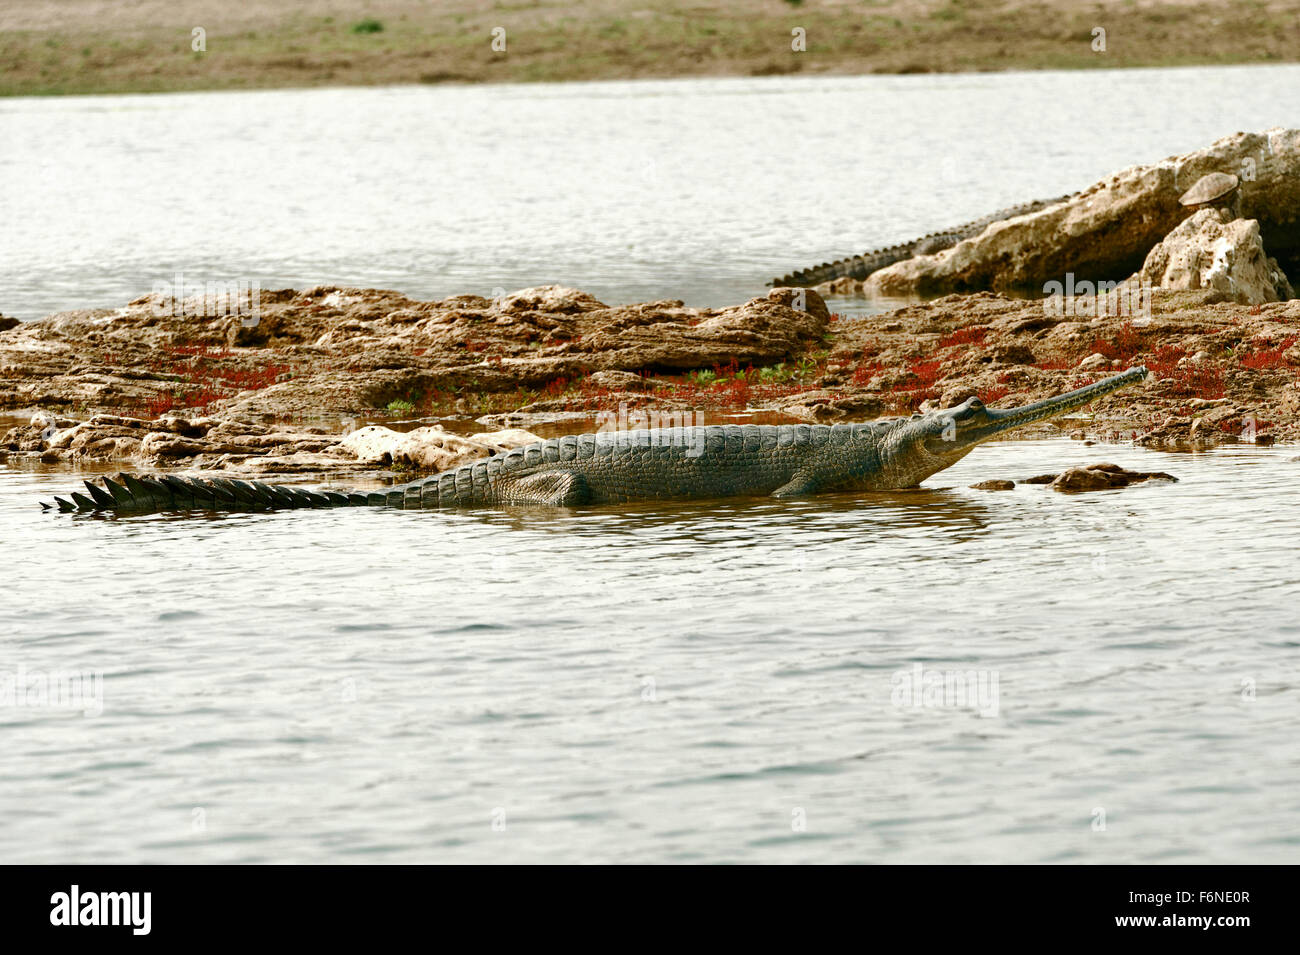 Gavialis gangeticus, gharial, gavial, poisson mangeant crocodile, inde, asie Banque D'Images